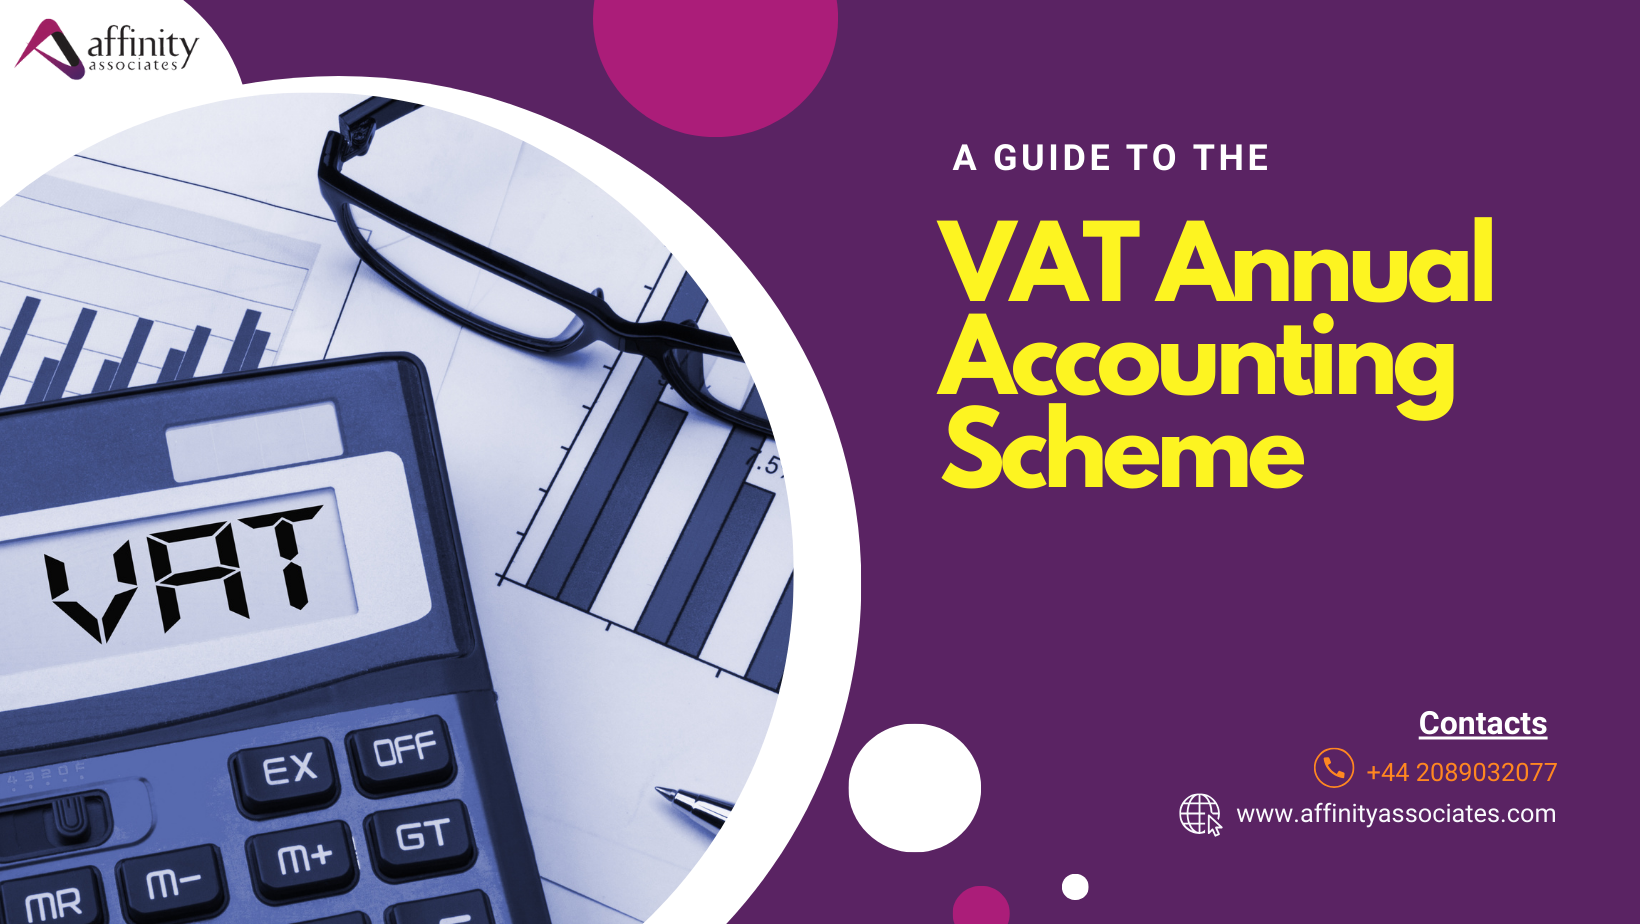 A Guide to the VAT Annual Accounting Scheme